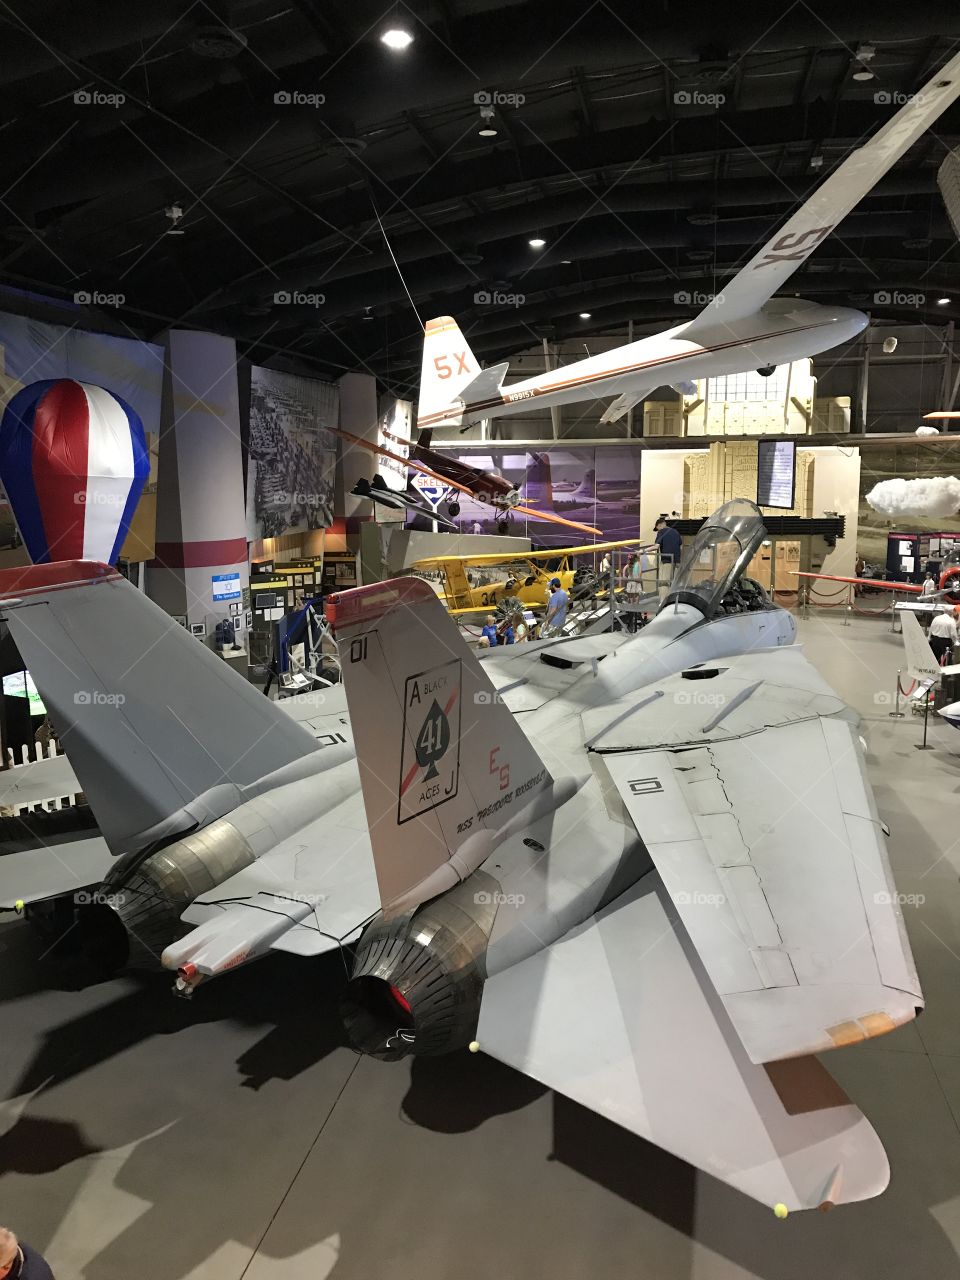 F-14 Tomcat inside Tulsa Air and Space Museum